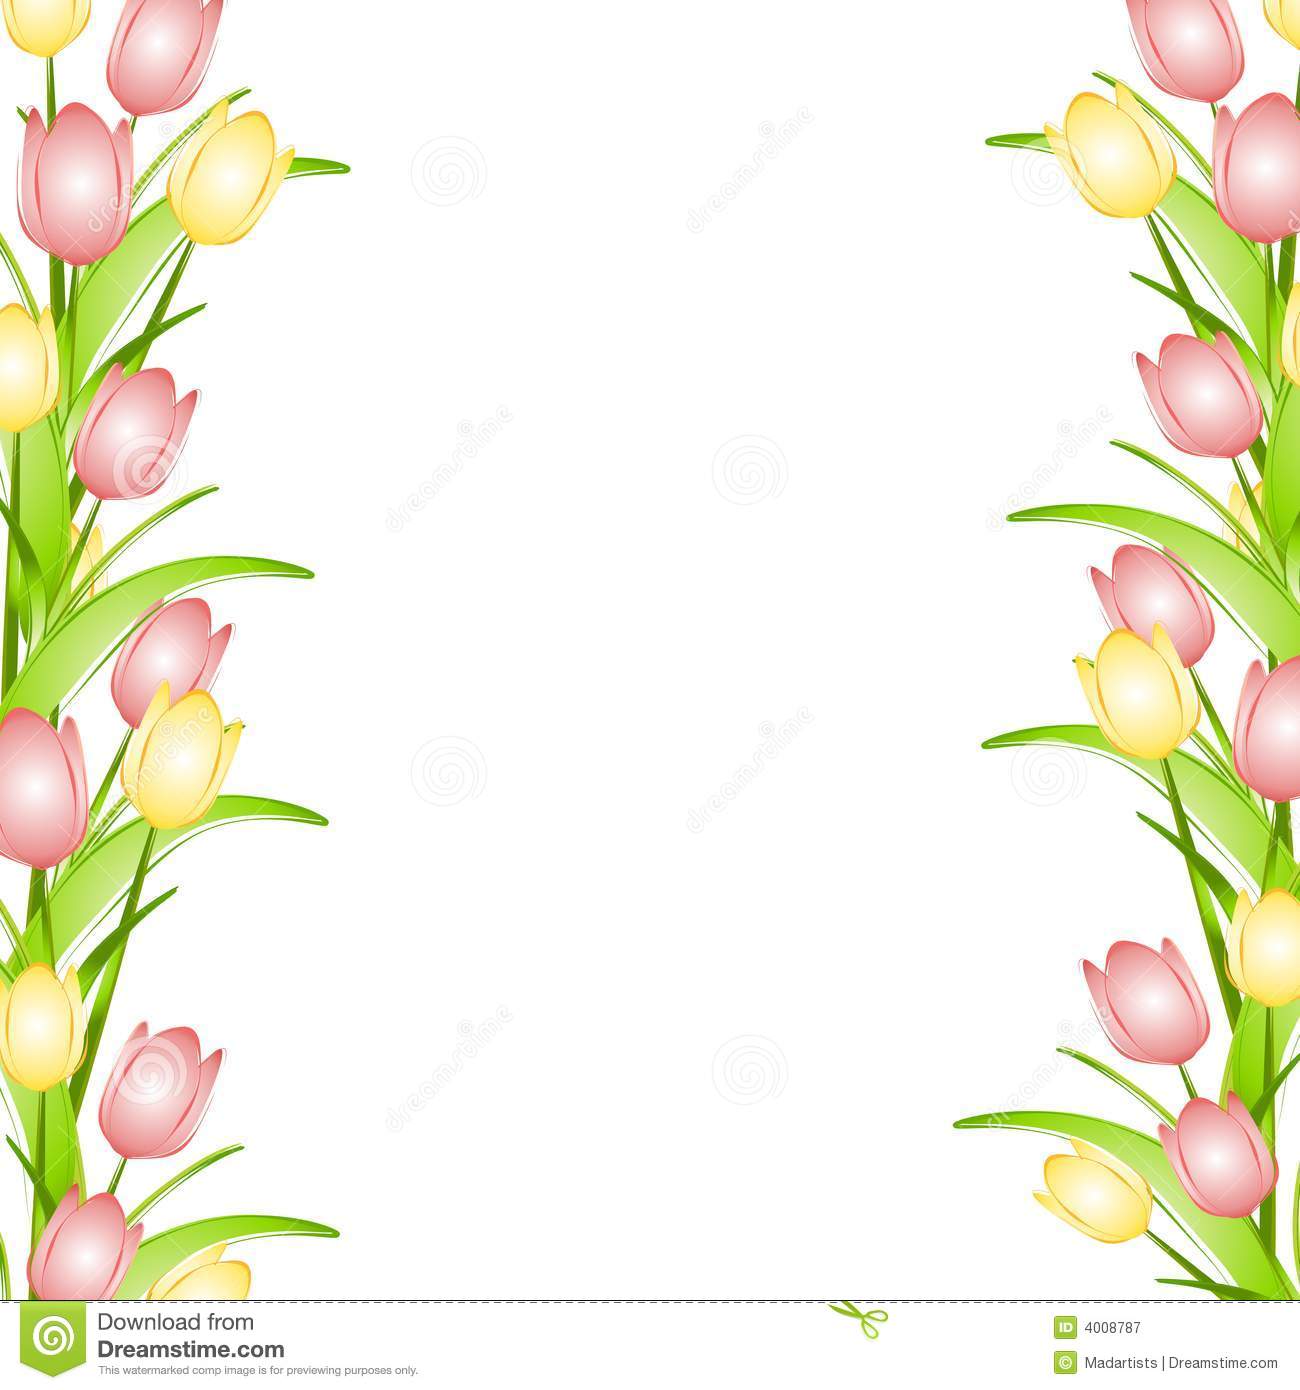 Pink Yellow Spring Tulips Flower Border Royalty Free Stock Photography    